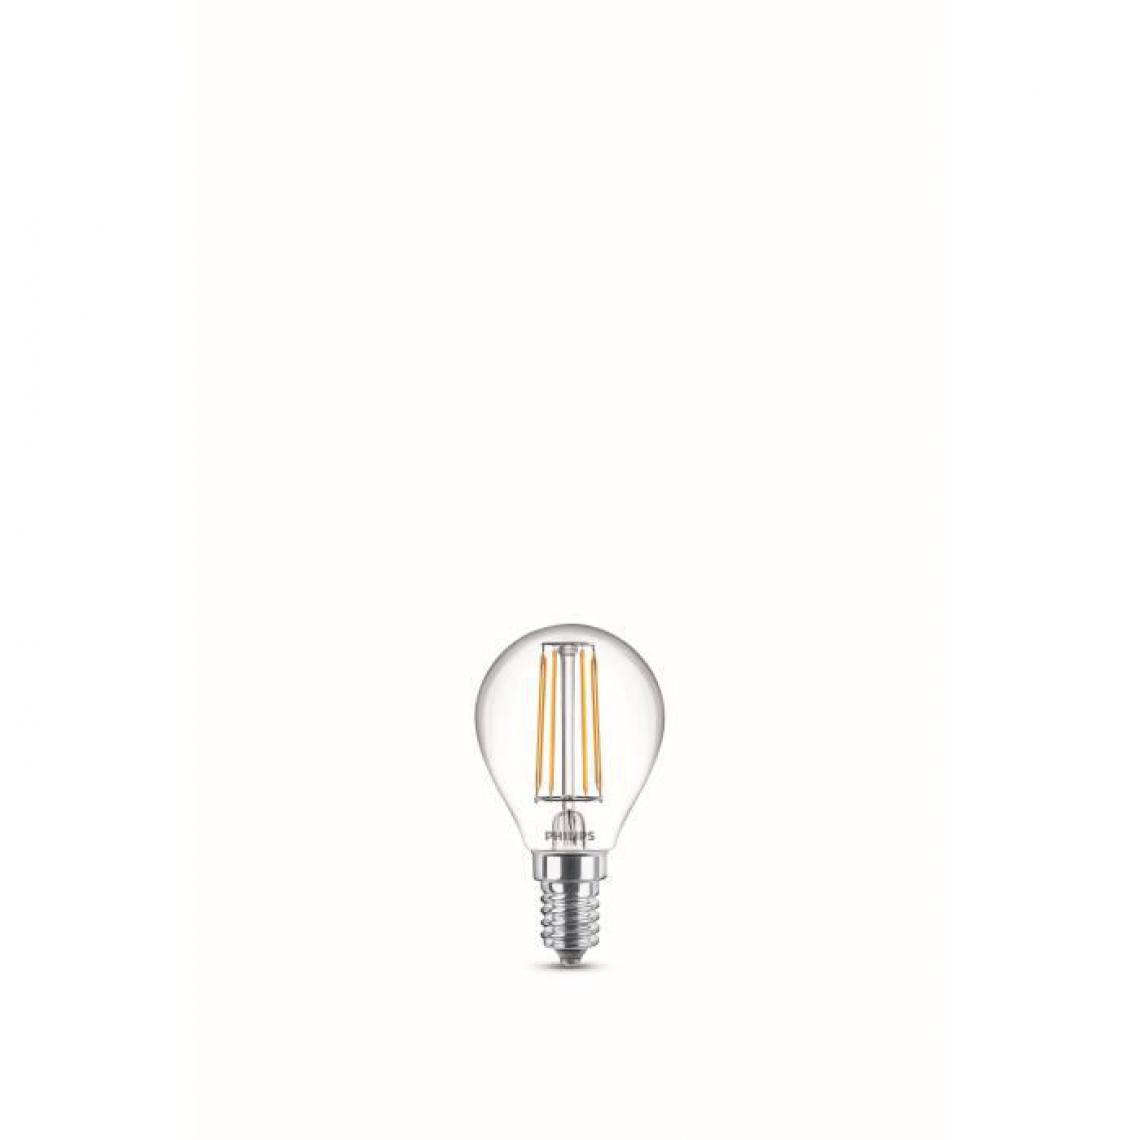 Philips - Philips Ampoule LED Equivalent 40W E14 Blanc froid Non Dimmable - Ampoules LED